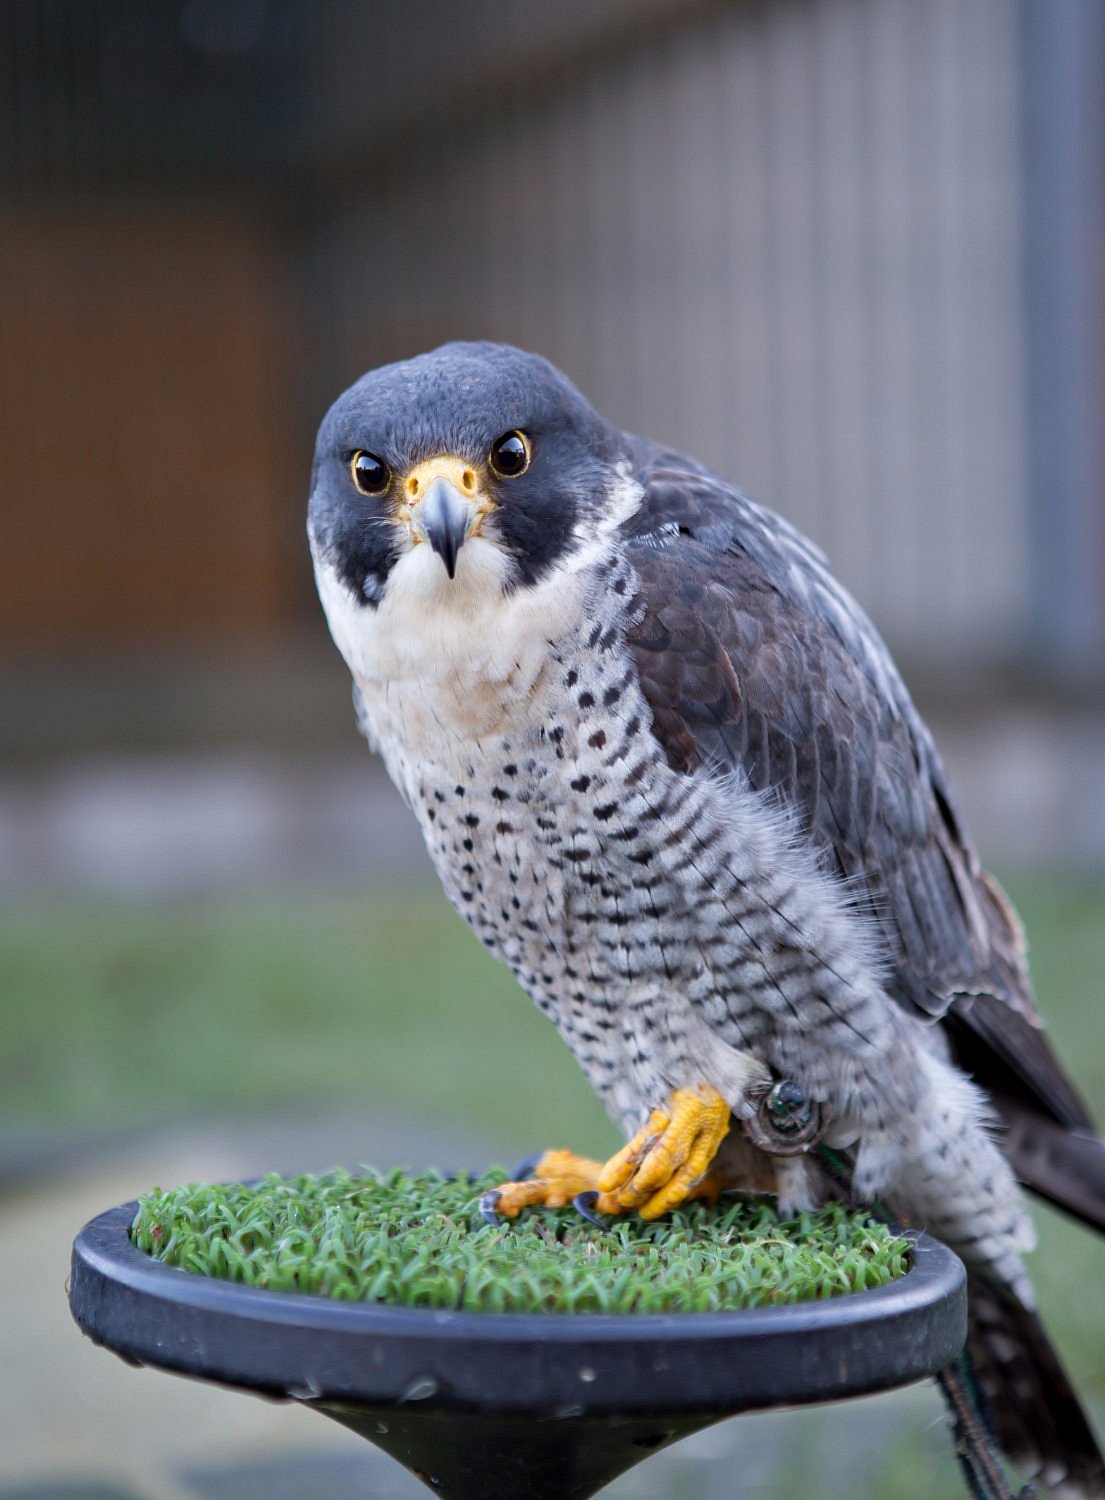 Review: Five reasons to visit the National Centre for Birds of Prey